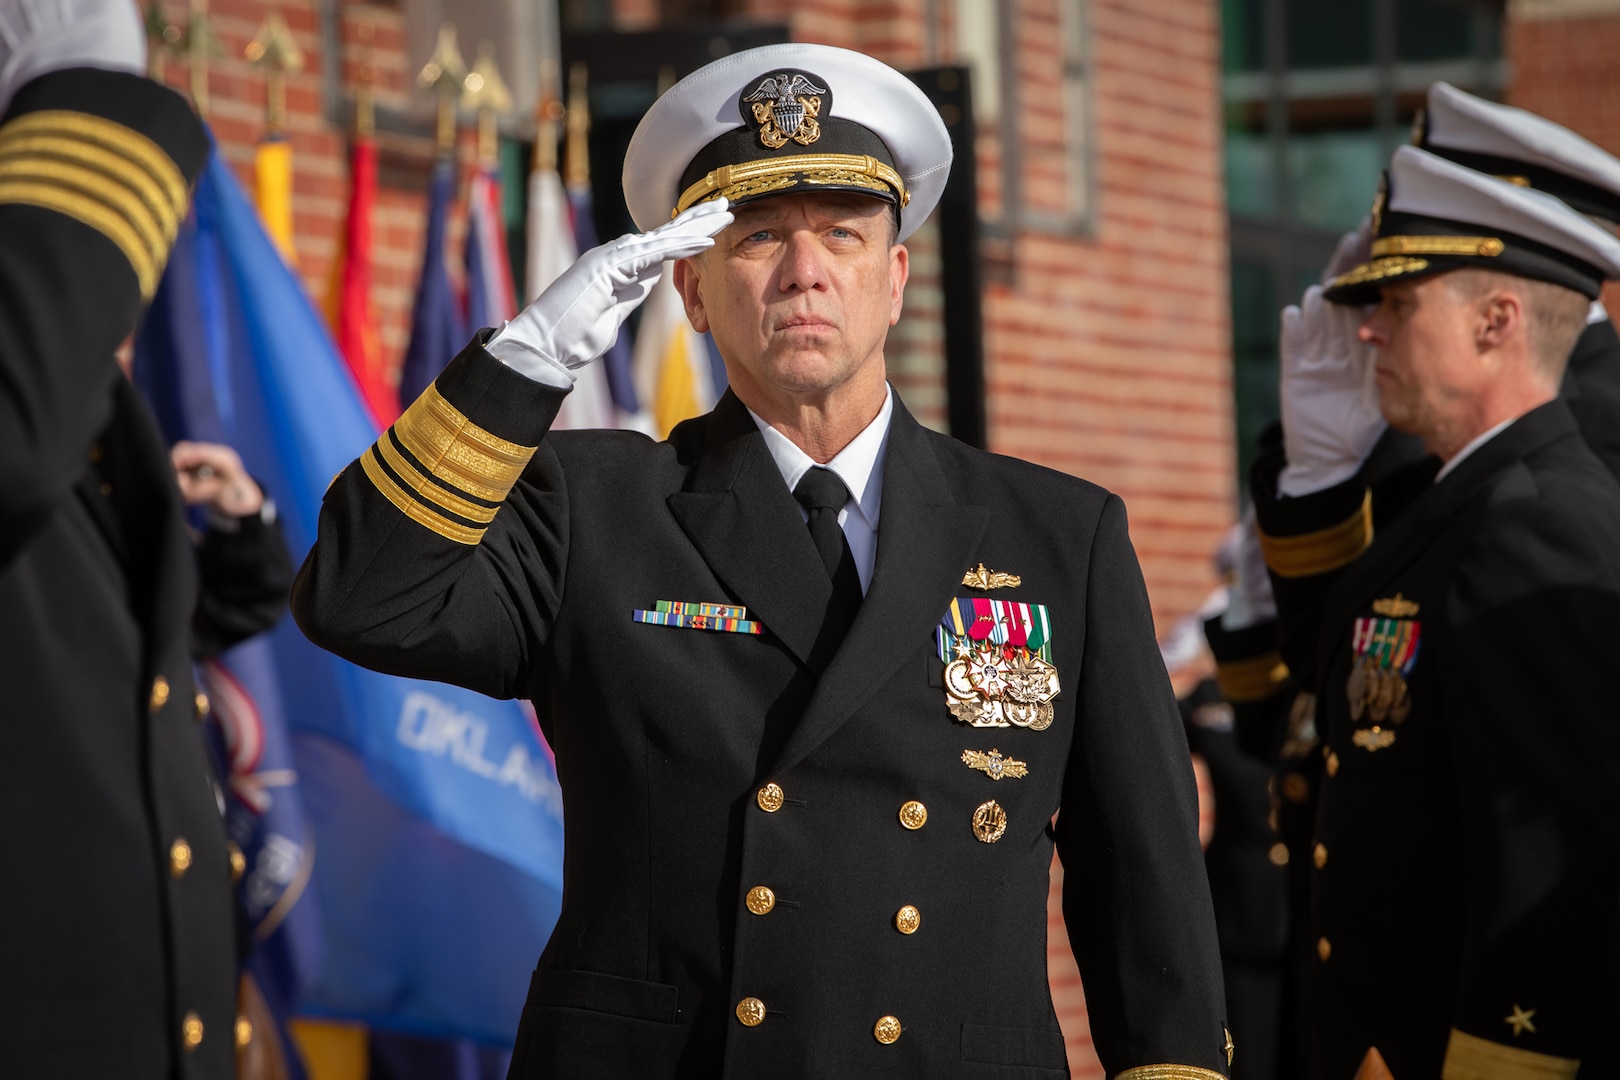 Vice Adm. James Downey assumed command from Rear Adm. Thomas Anderson as commander, Naval Sea Systems Command (NAVSEA) during a change of command ceremony at the Washington Navy Yard, Jan. 3. The ceremony was presided over by the Chief of Naval Operations Adm. Lisa Franchetti. (U.S. Navy photo by Laura Lakeway/RELEASED)